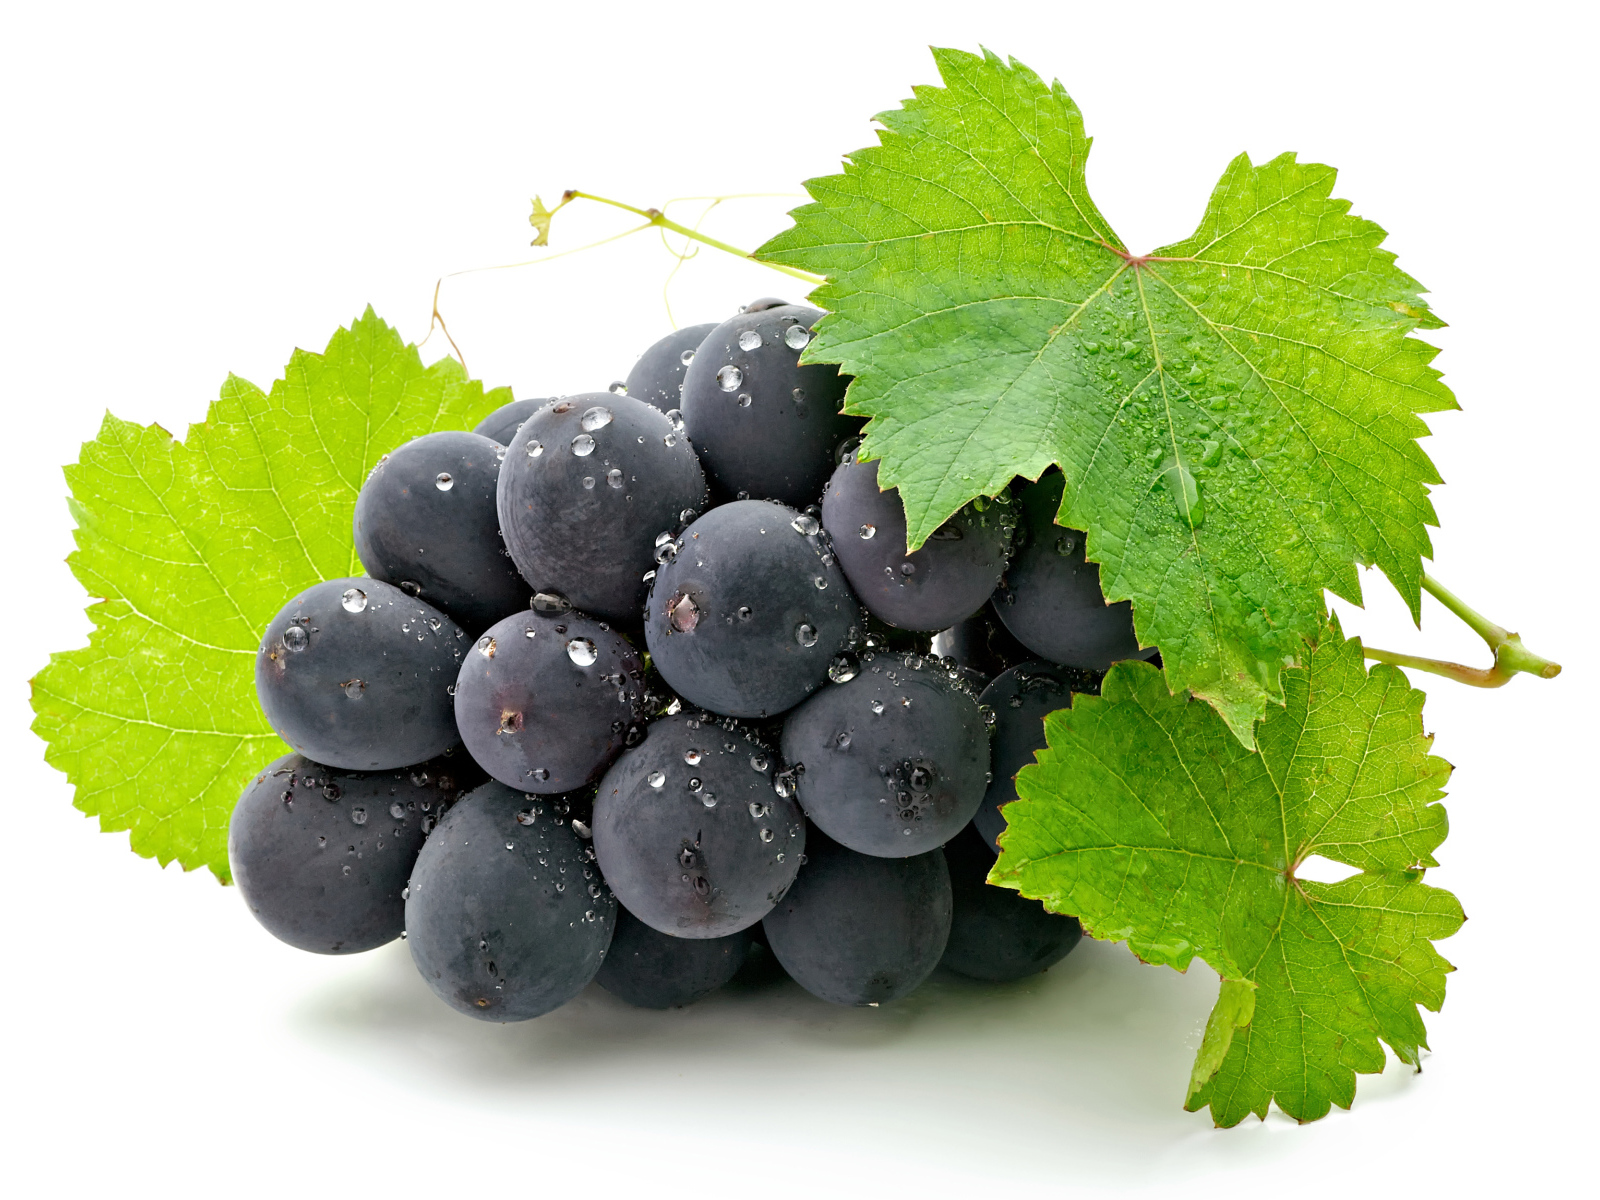 Blue grapes with green leaves on white background